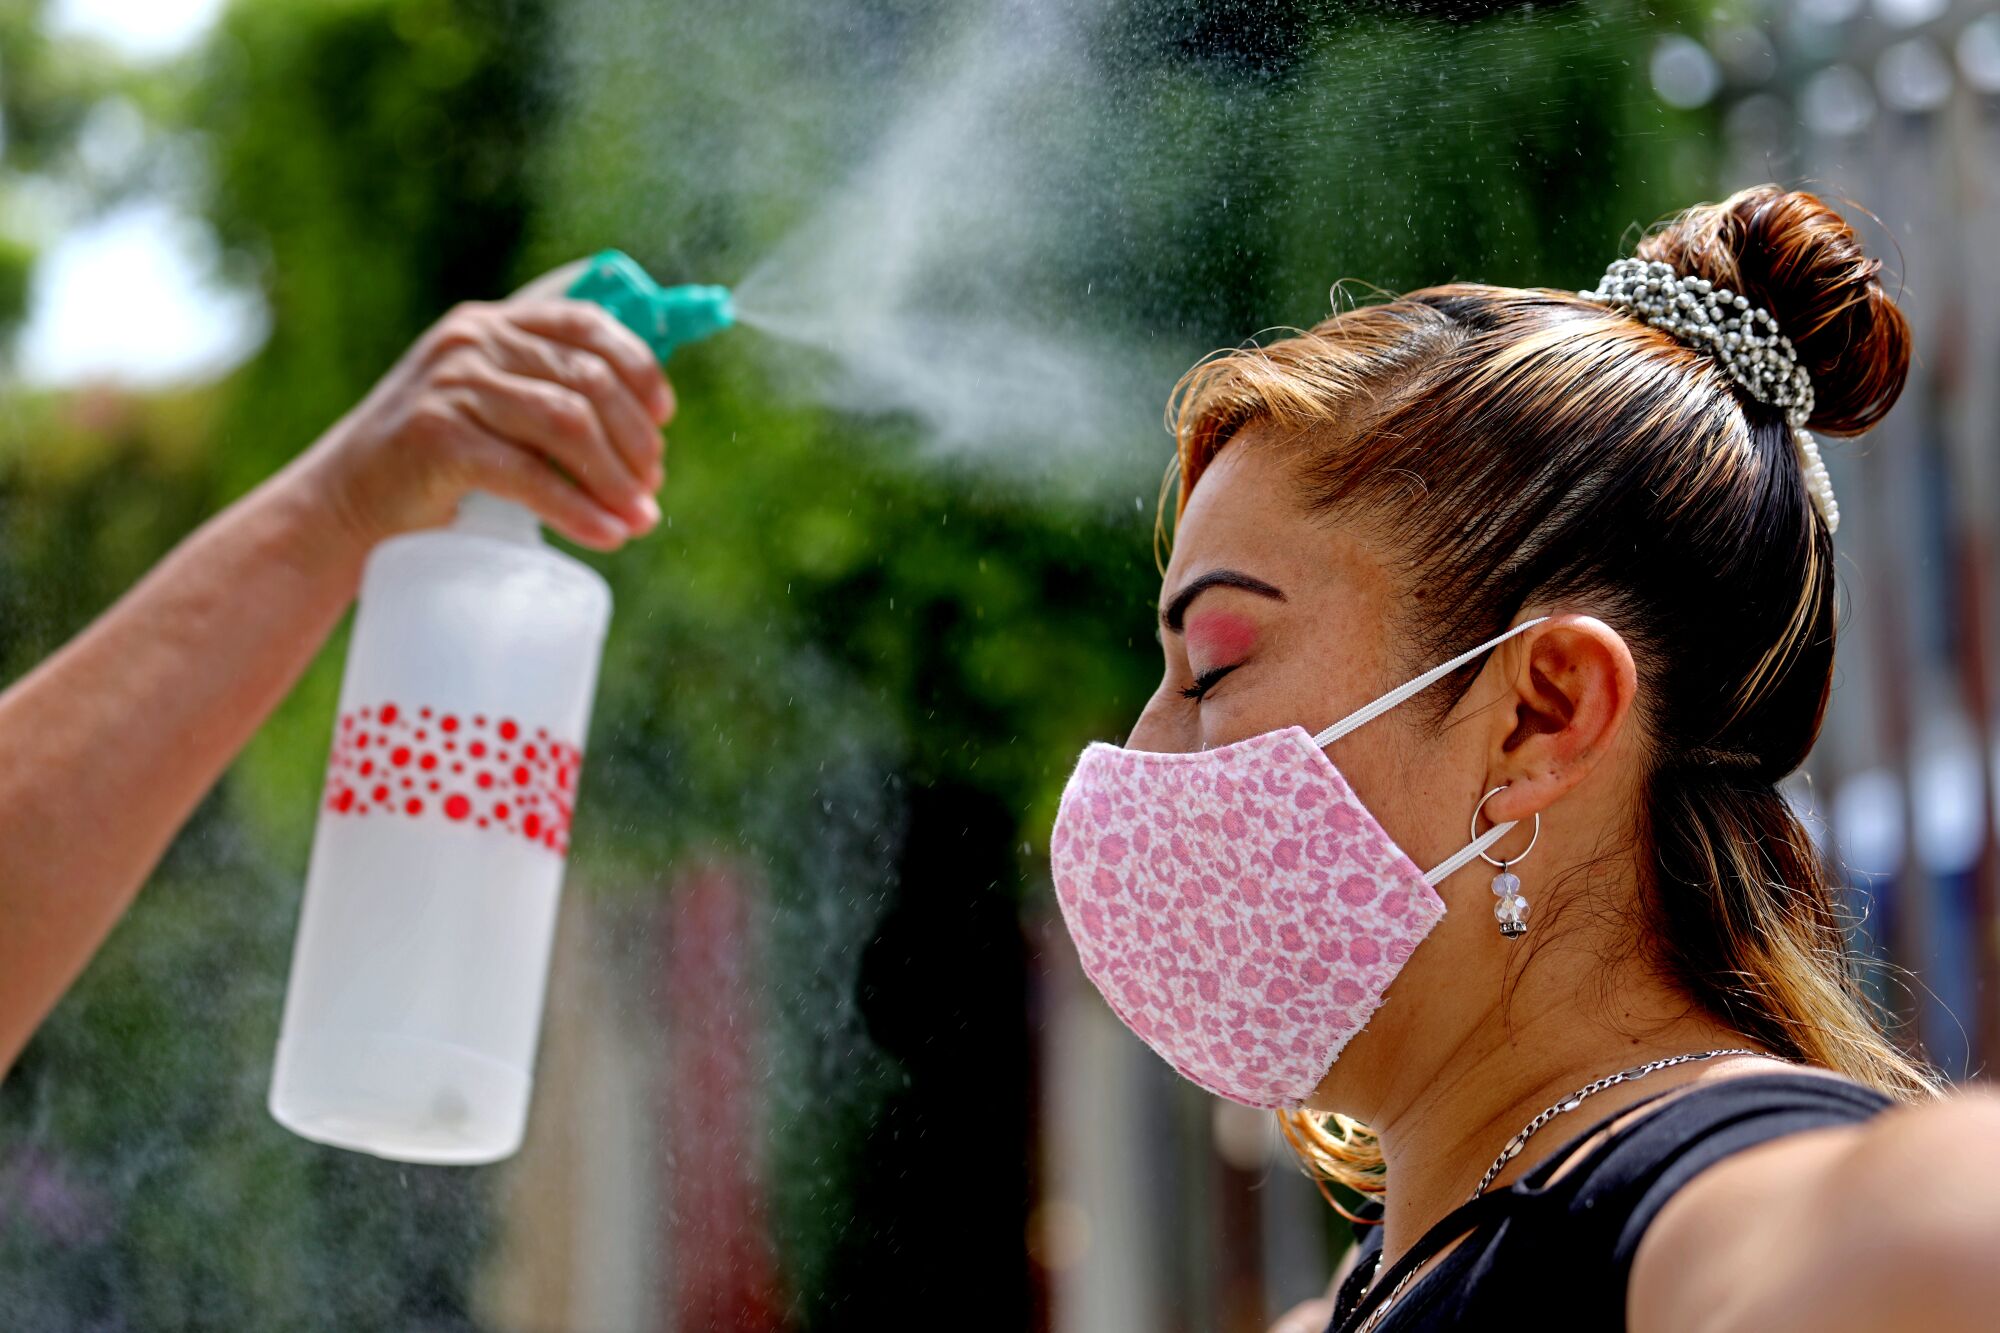 Mist from a spray bottle falls over a woman in a mask